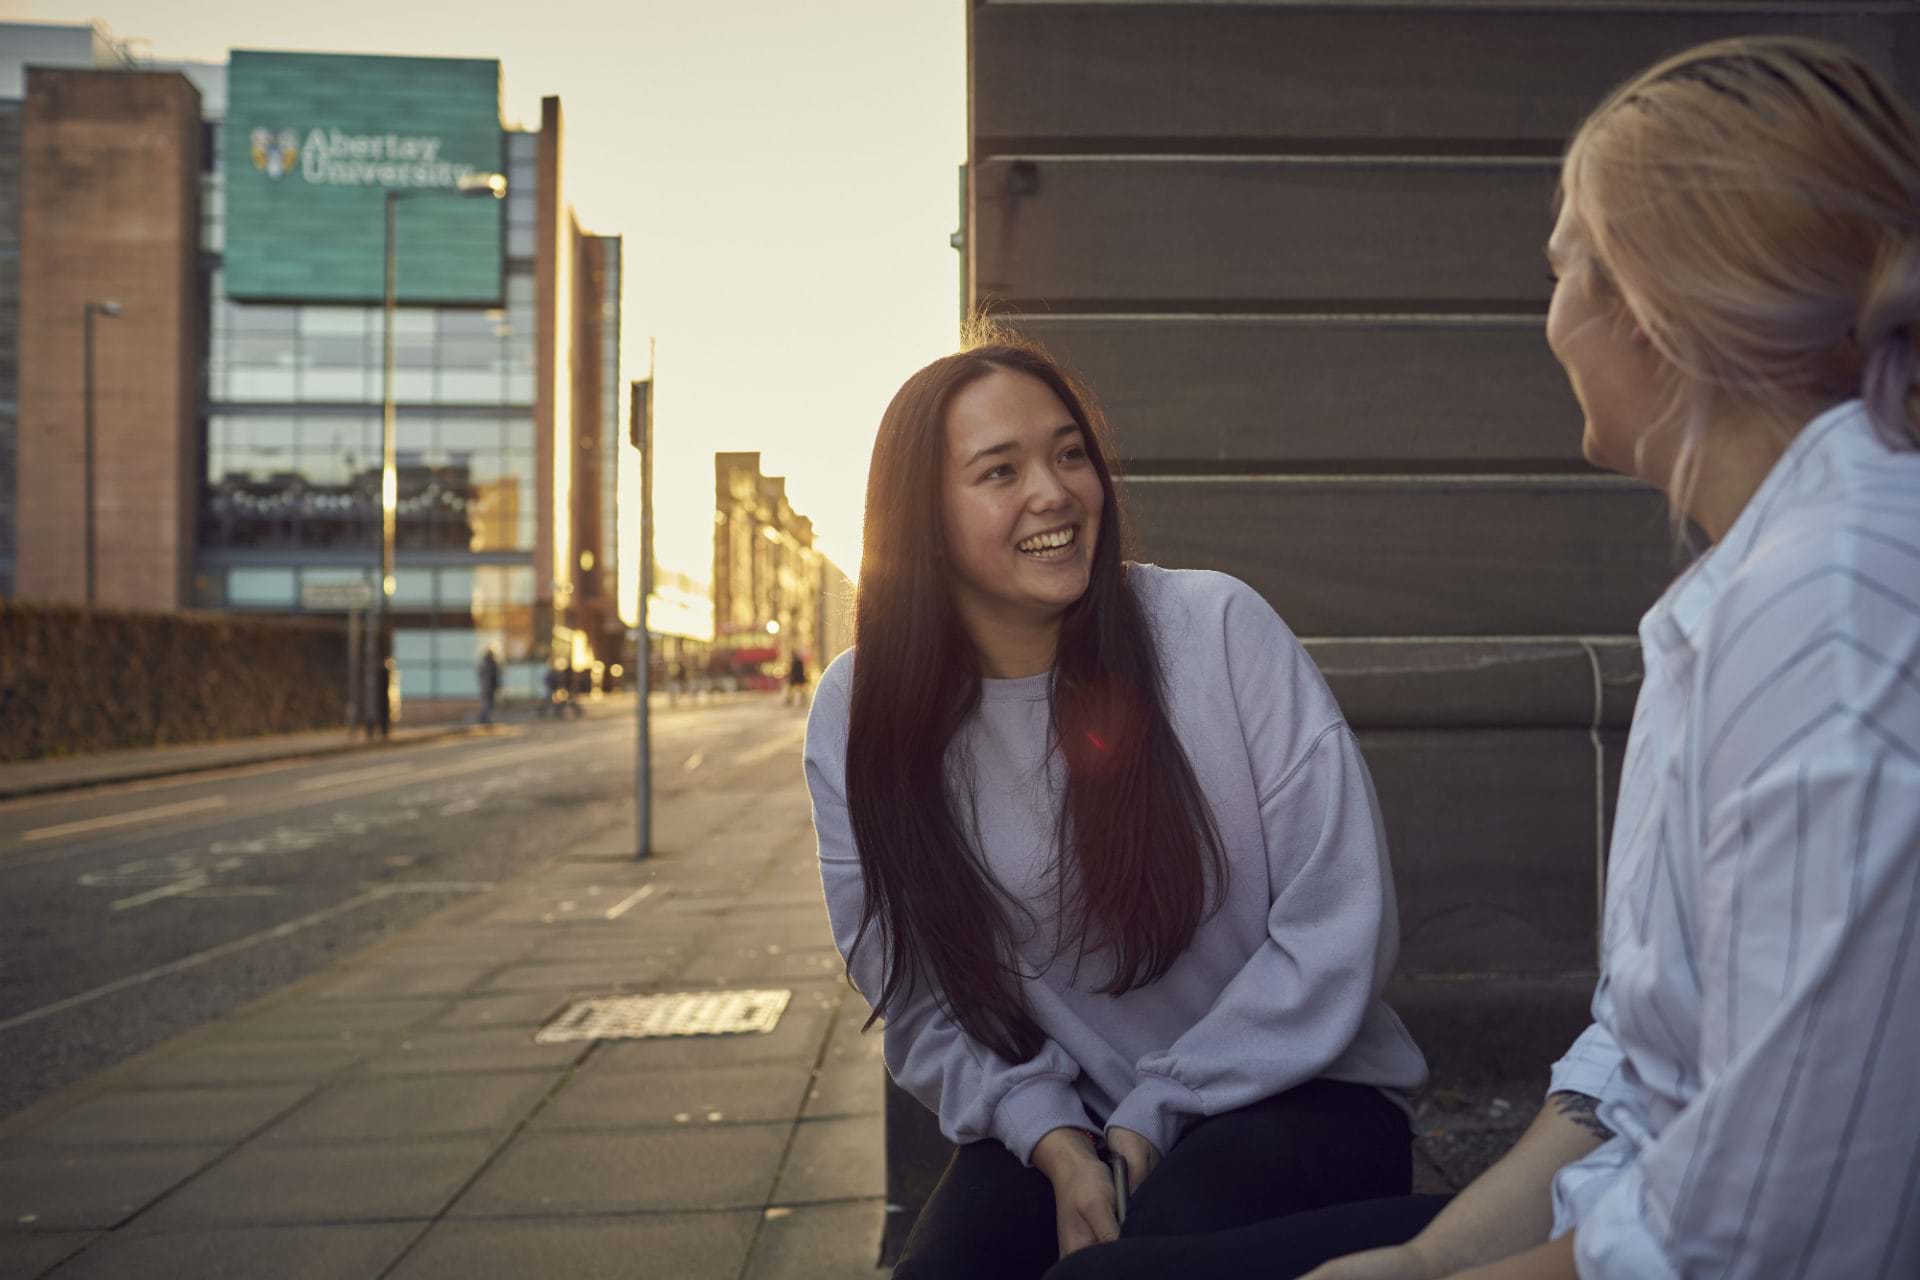 Two students sitting chatting outside Abertay campus 